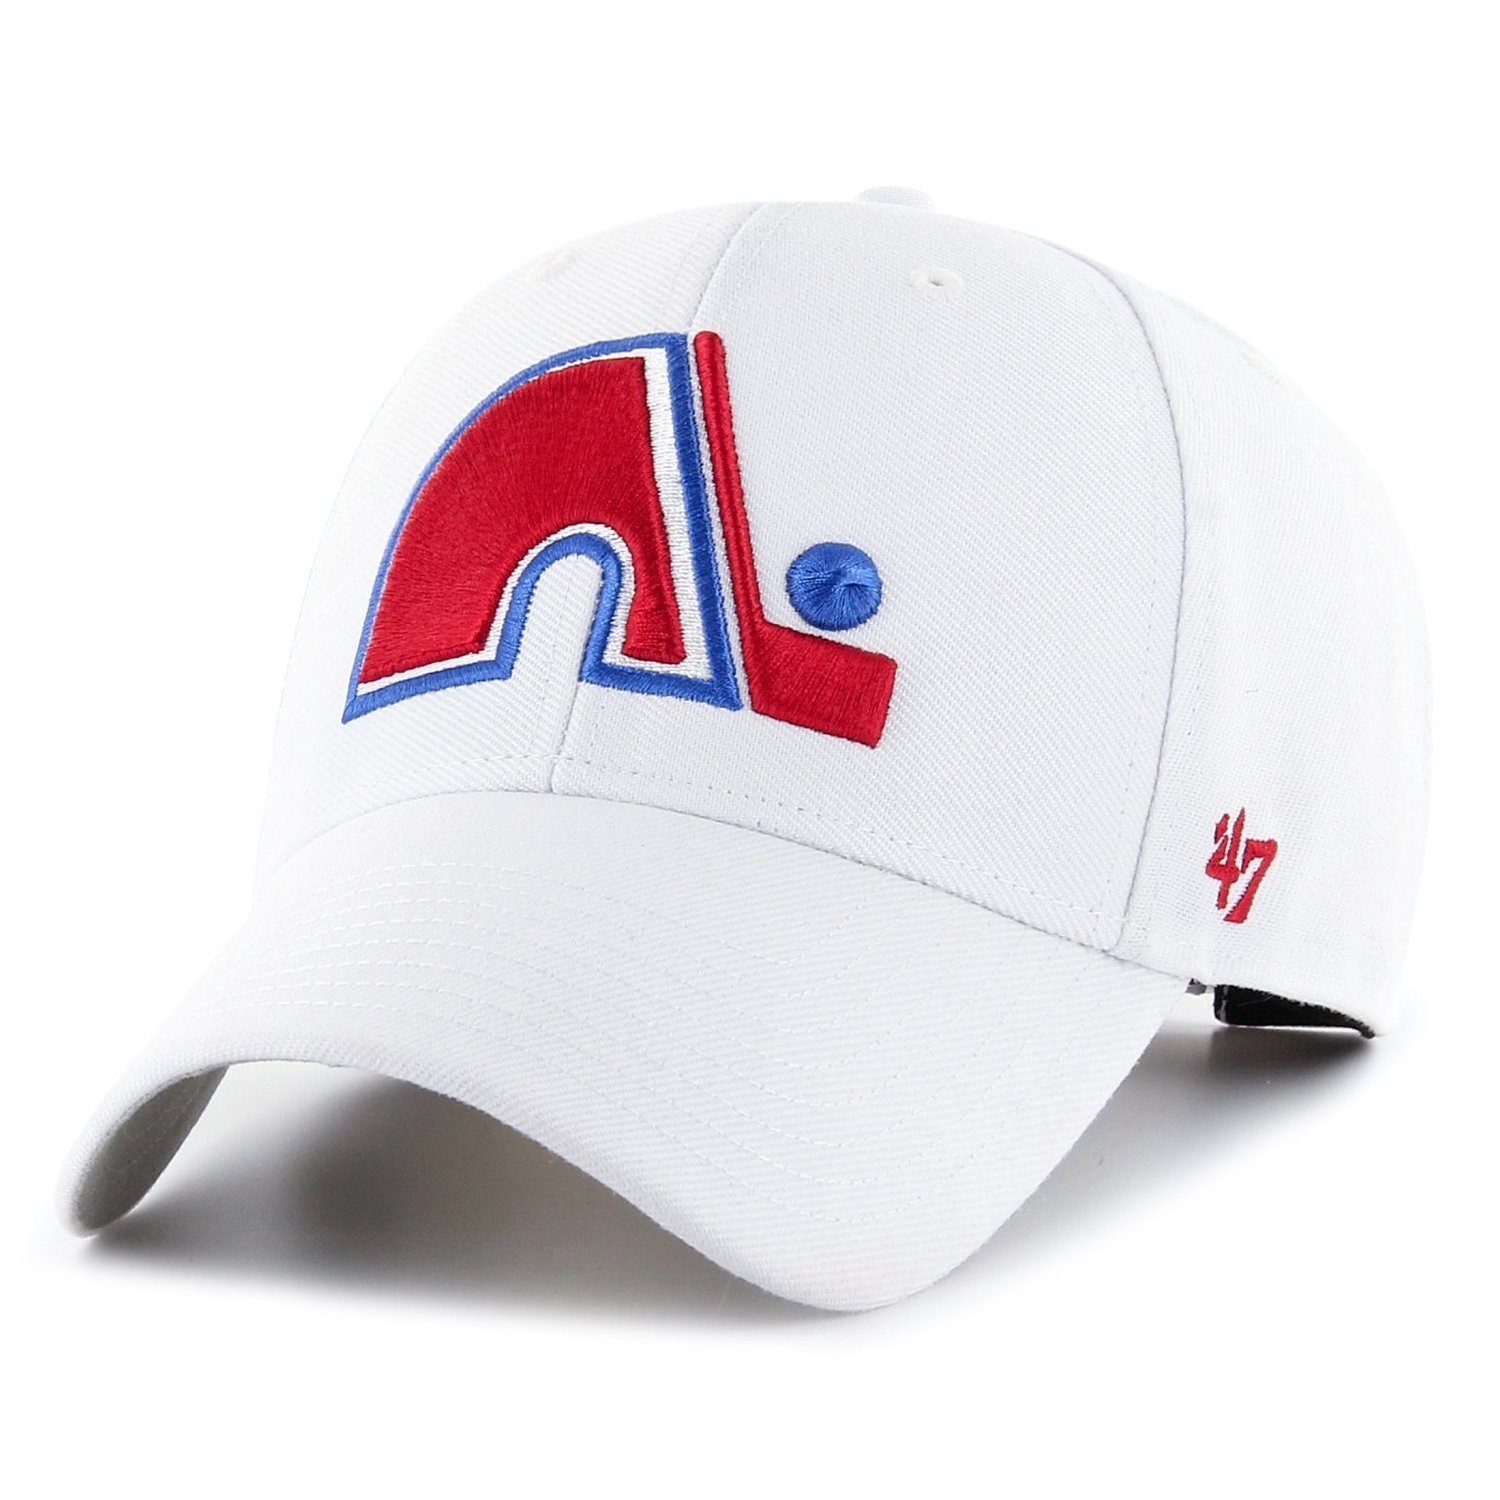 '47 Fit Nordiques Relaxed NHL Brand Trucker Quebec Cap